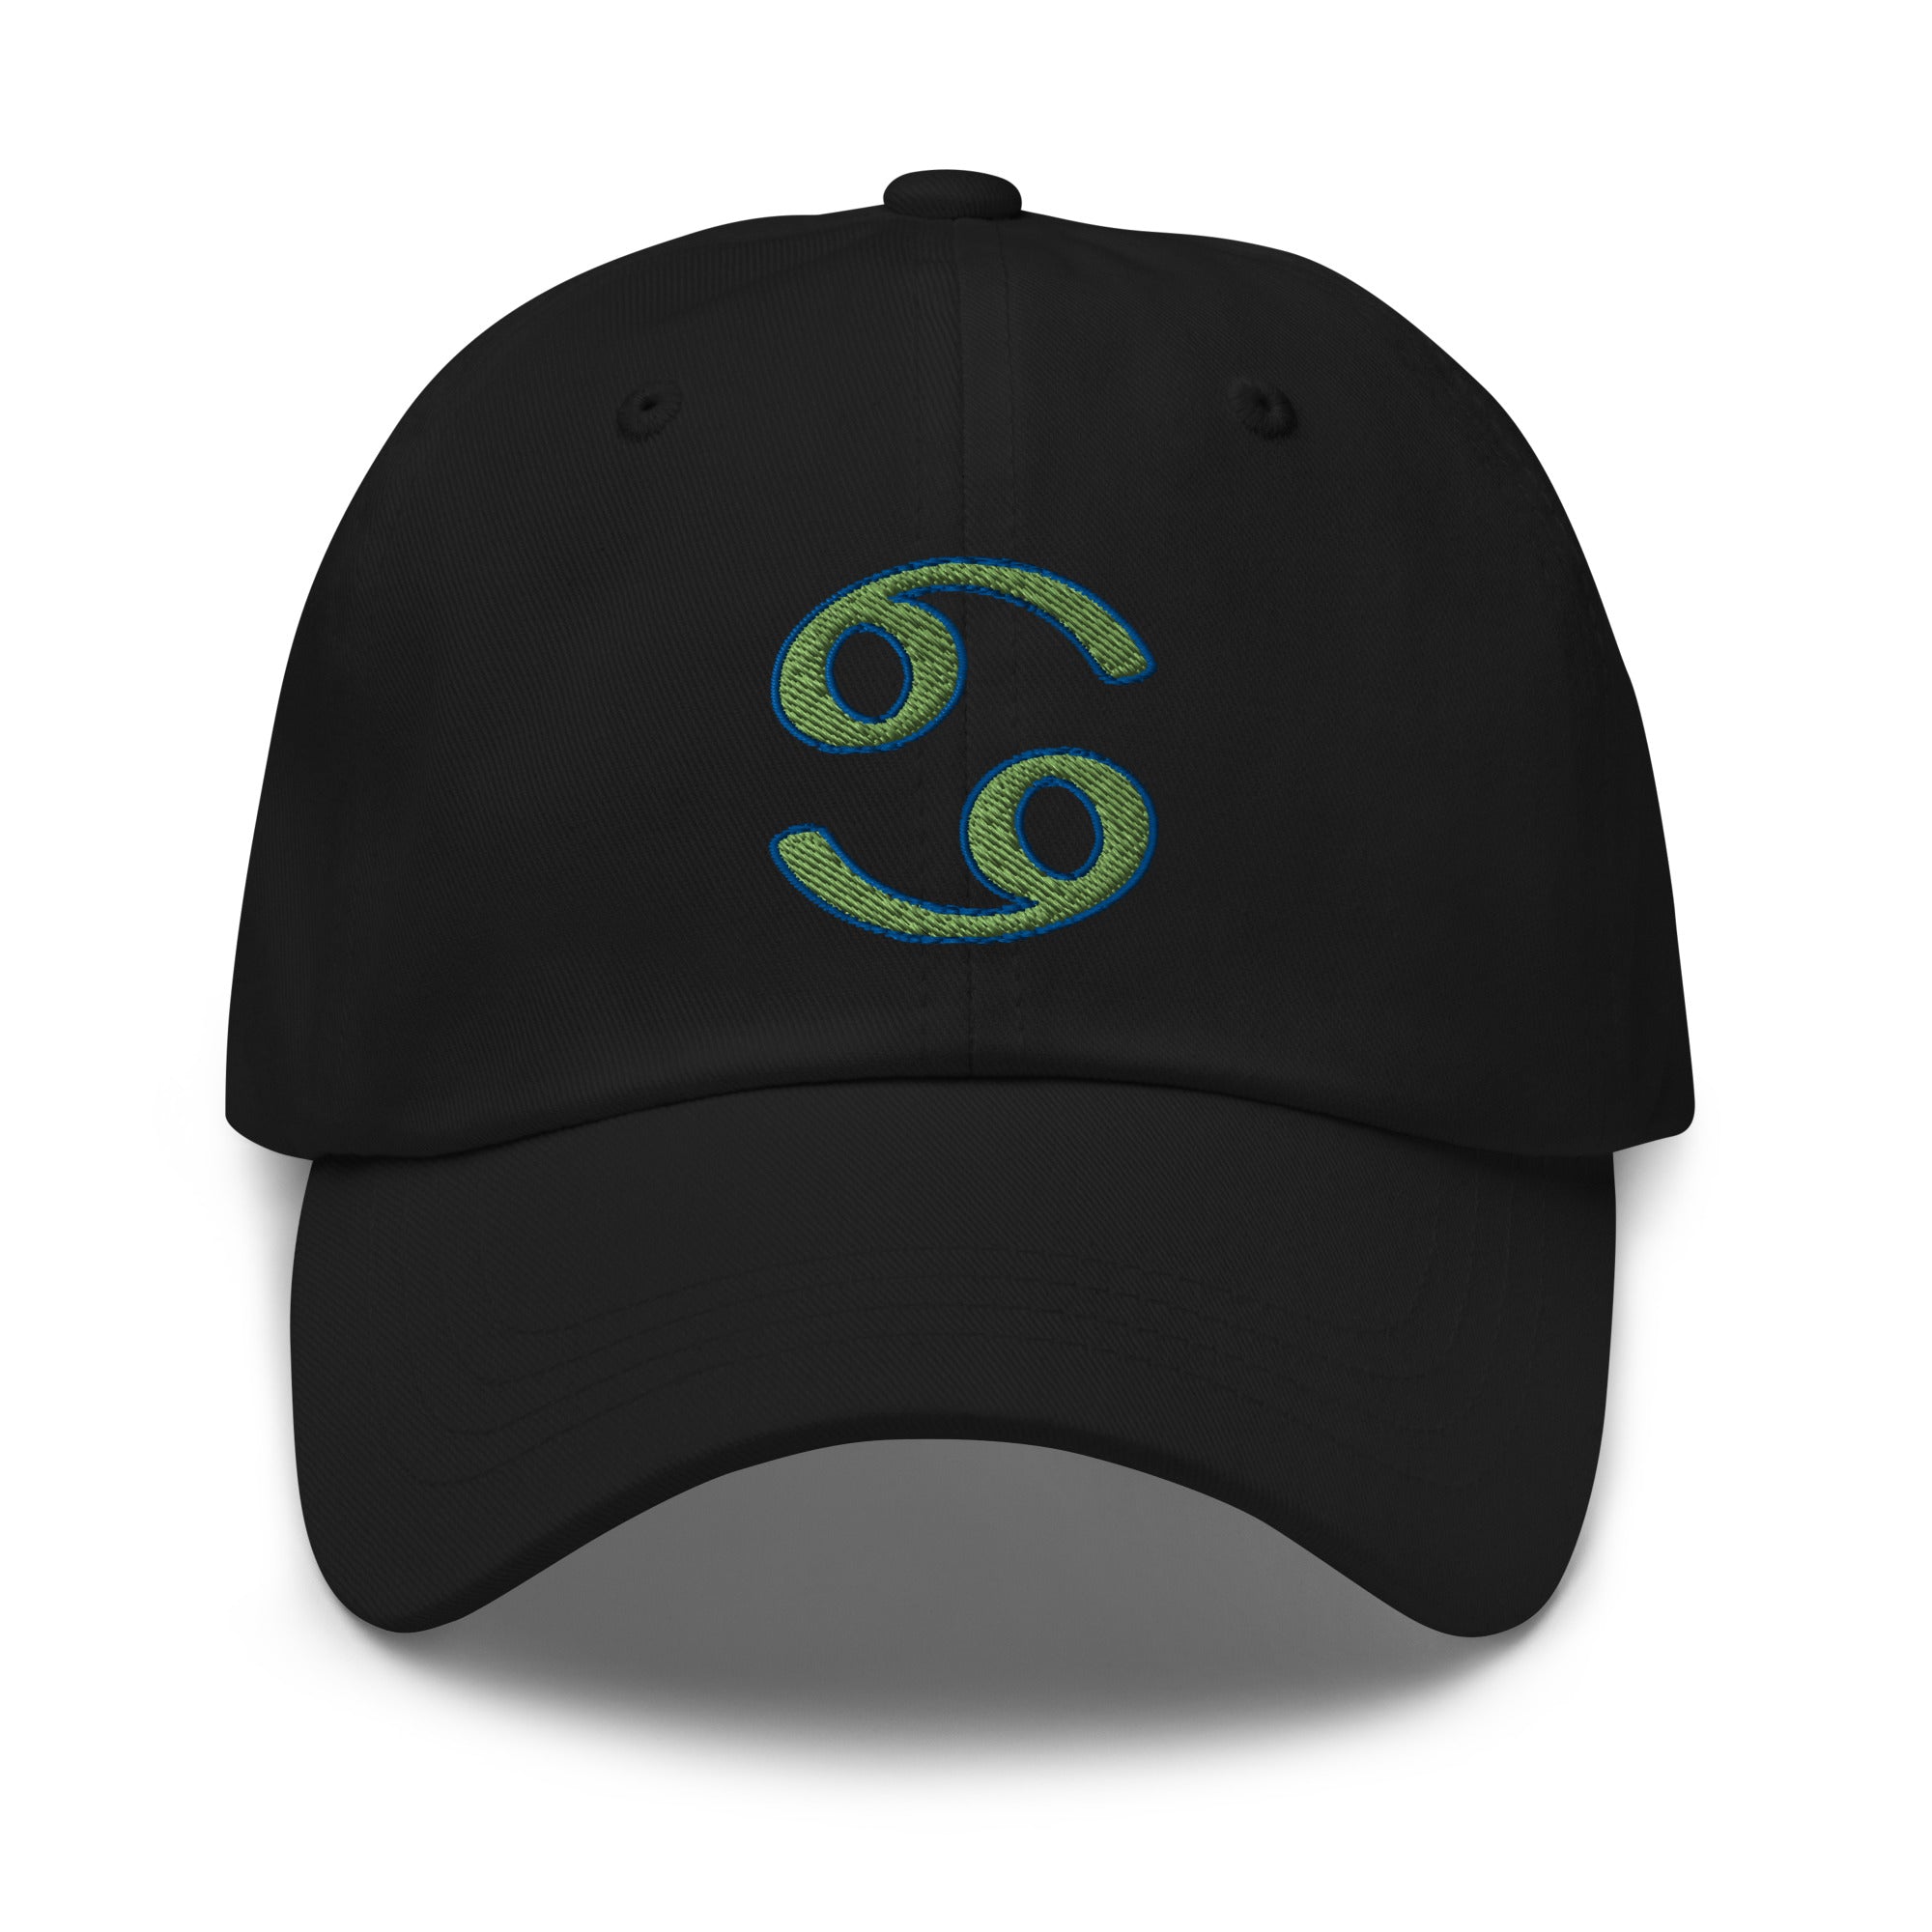 Zodiac Sign Cancer Embroidered Baseball Cap Astrology Horoscope Dad hat - Edge of Life Designs